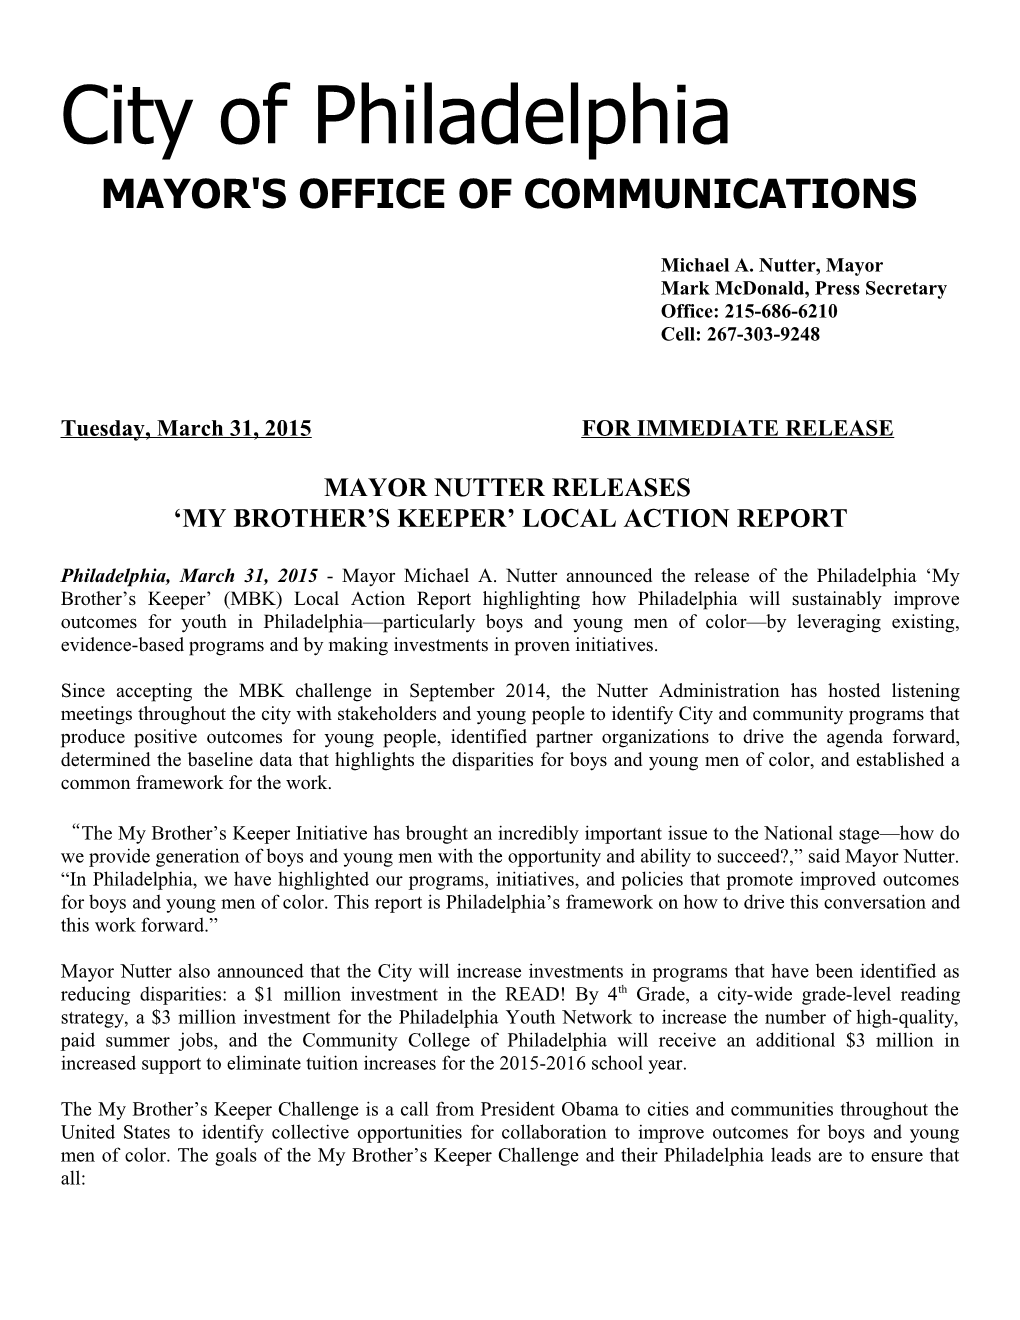 Tuesday, March 31, 2015 for IMMEDIATE RELEASE